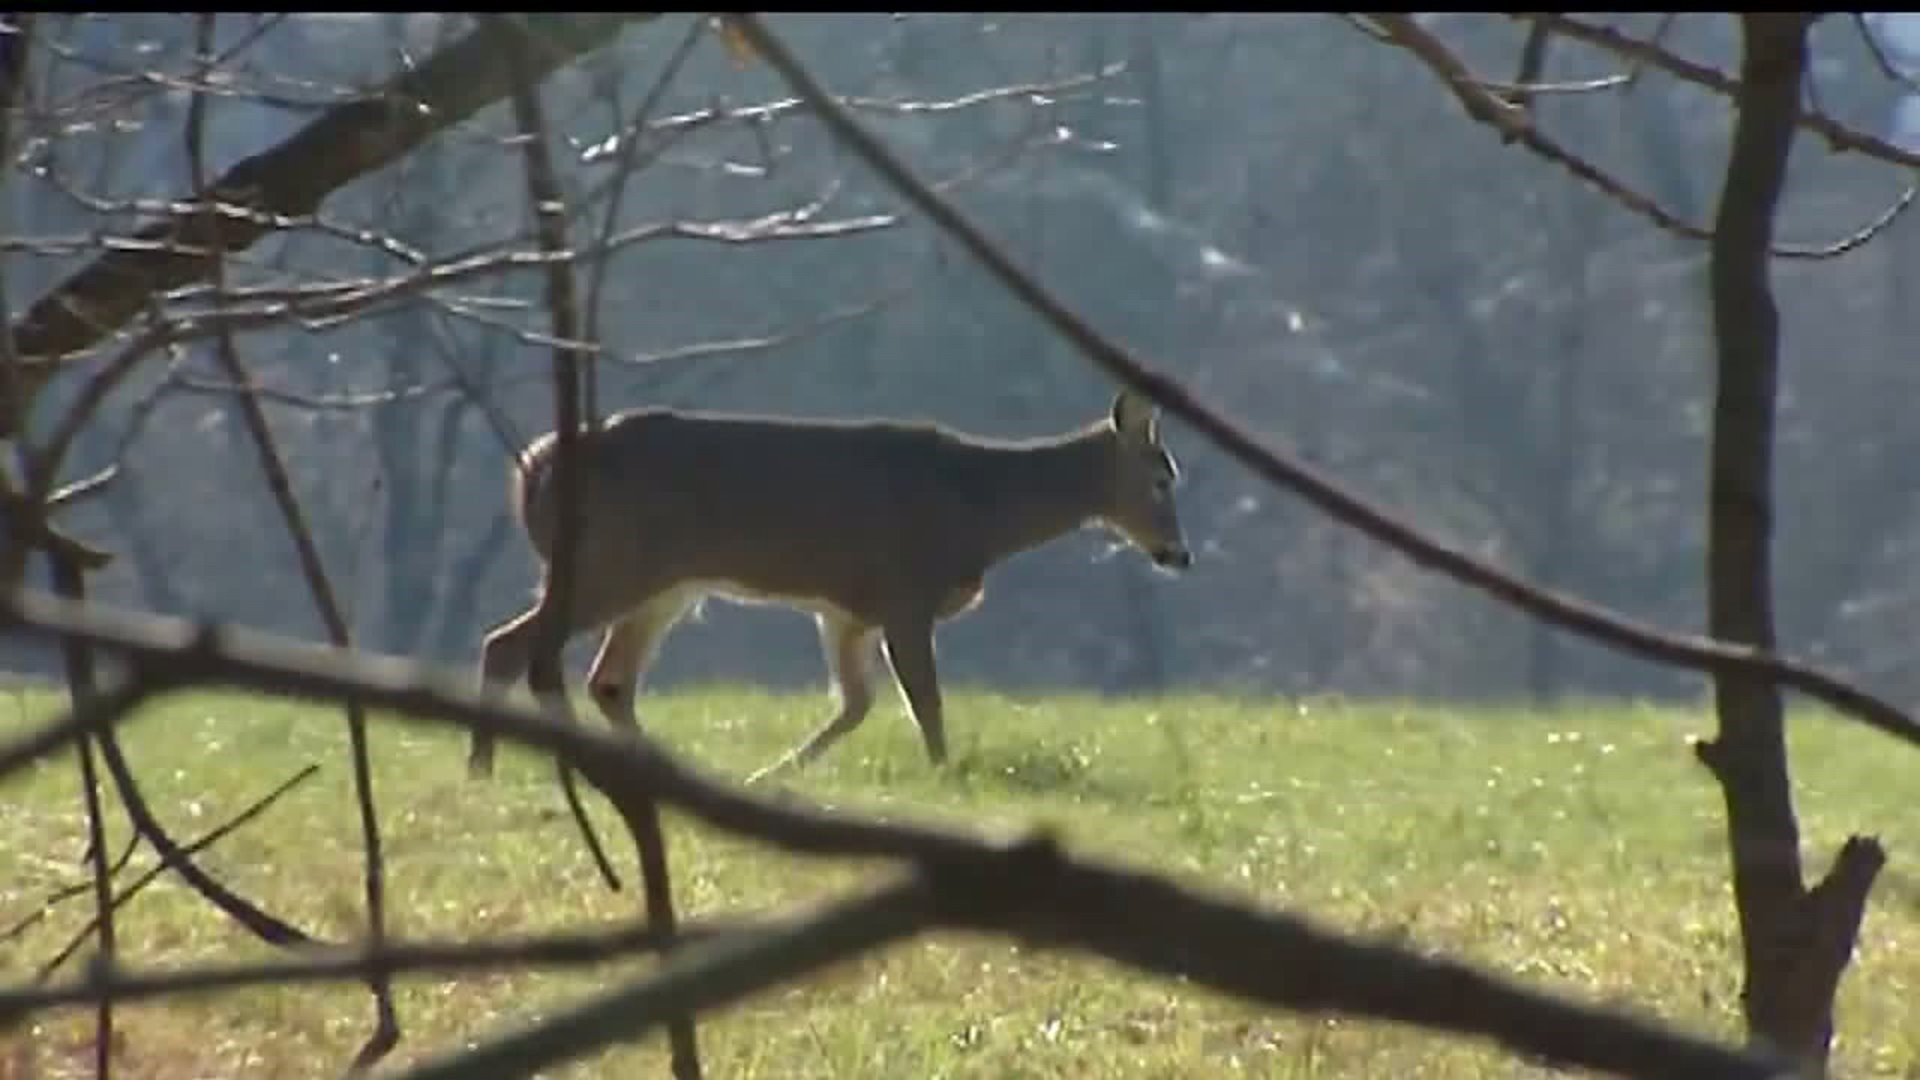 Drivers cautioned to look out for deer during mating season in Central Pa.